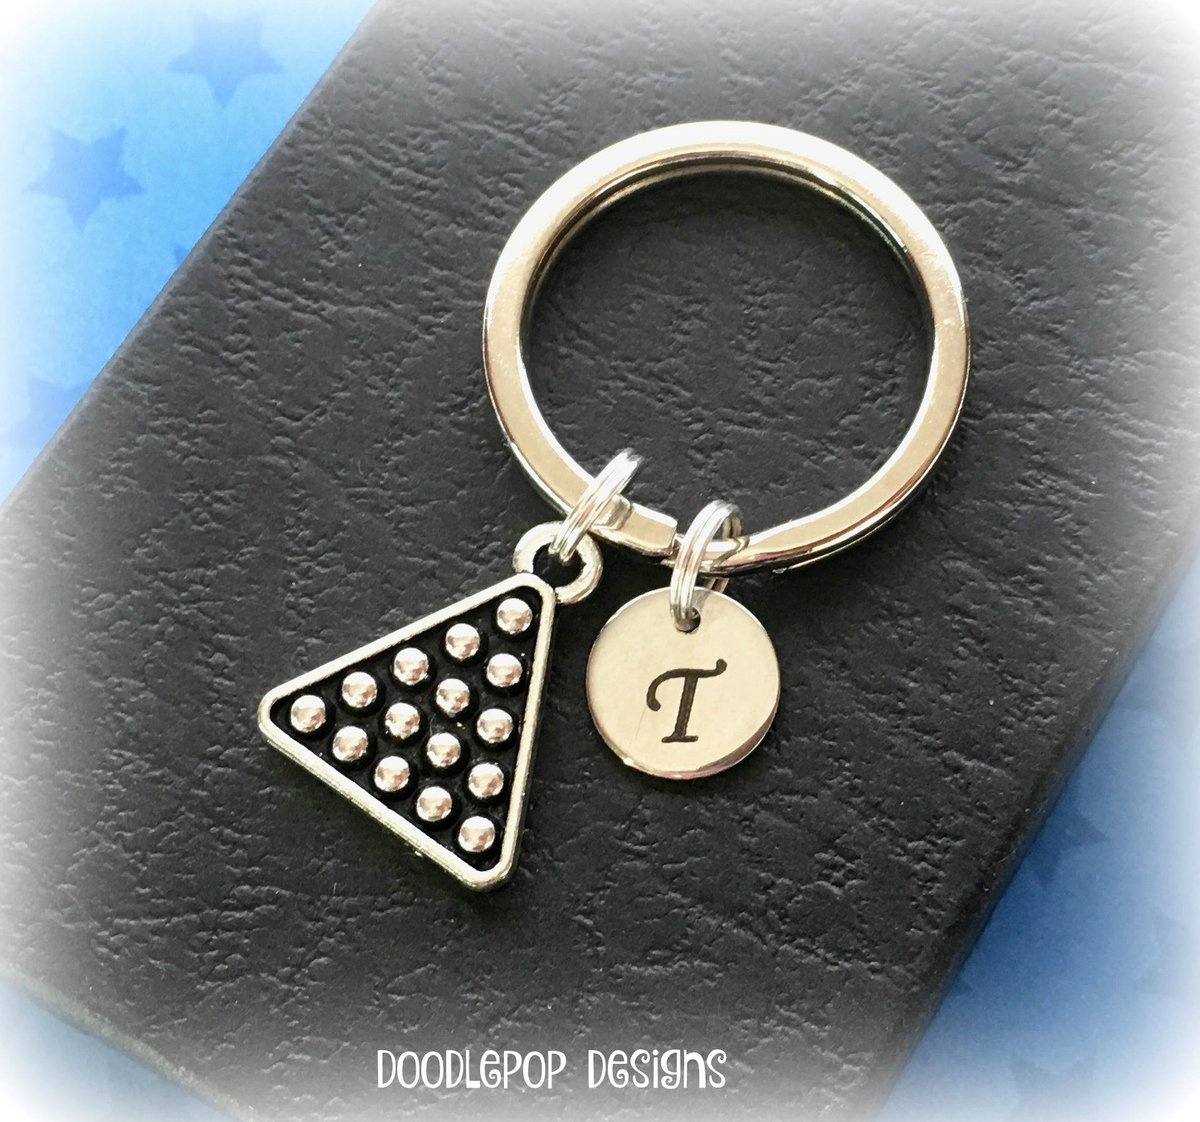 Initial keychain - Personalised pool player gift - Snooker k… tuppu.net/3020fe69 #DoodlepopDesigns #PoolKeyring